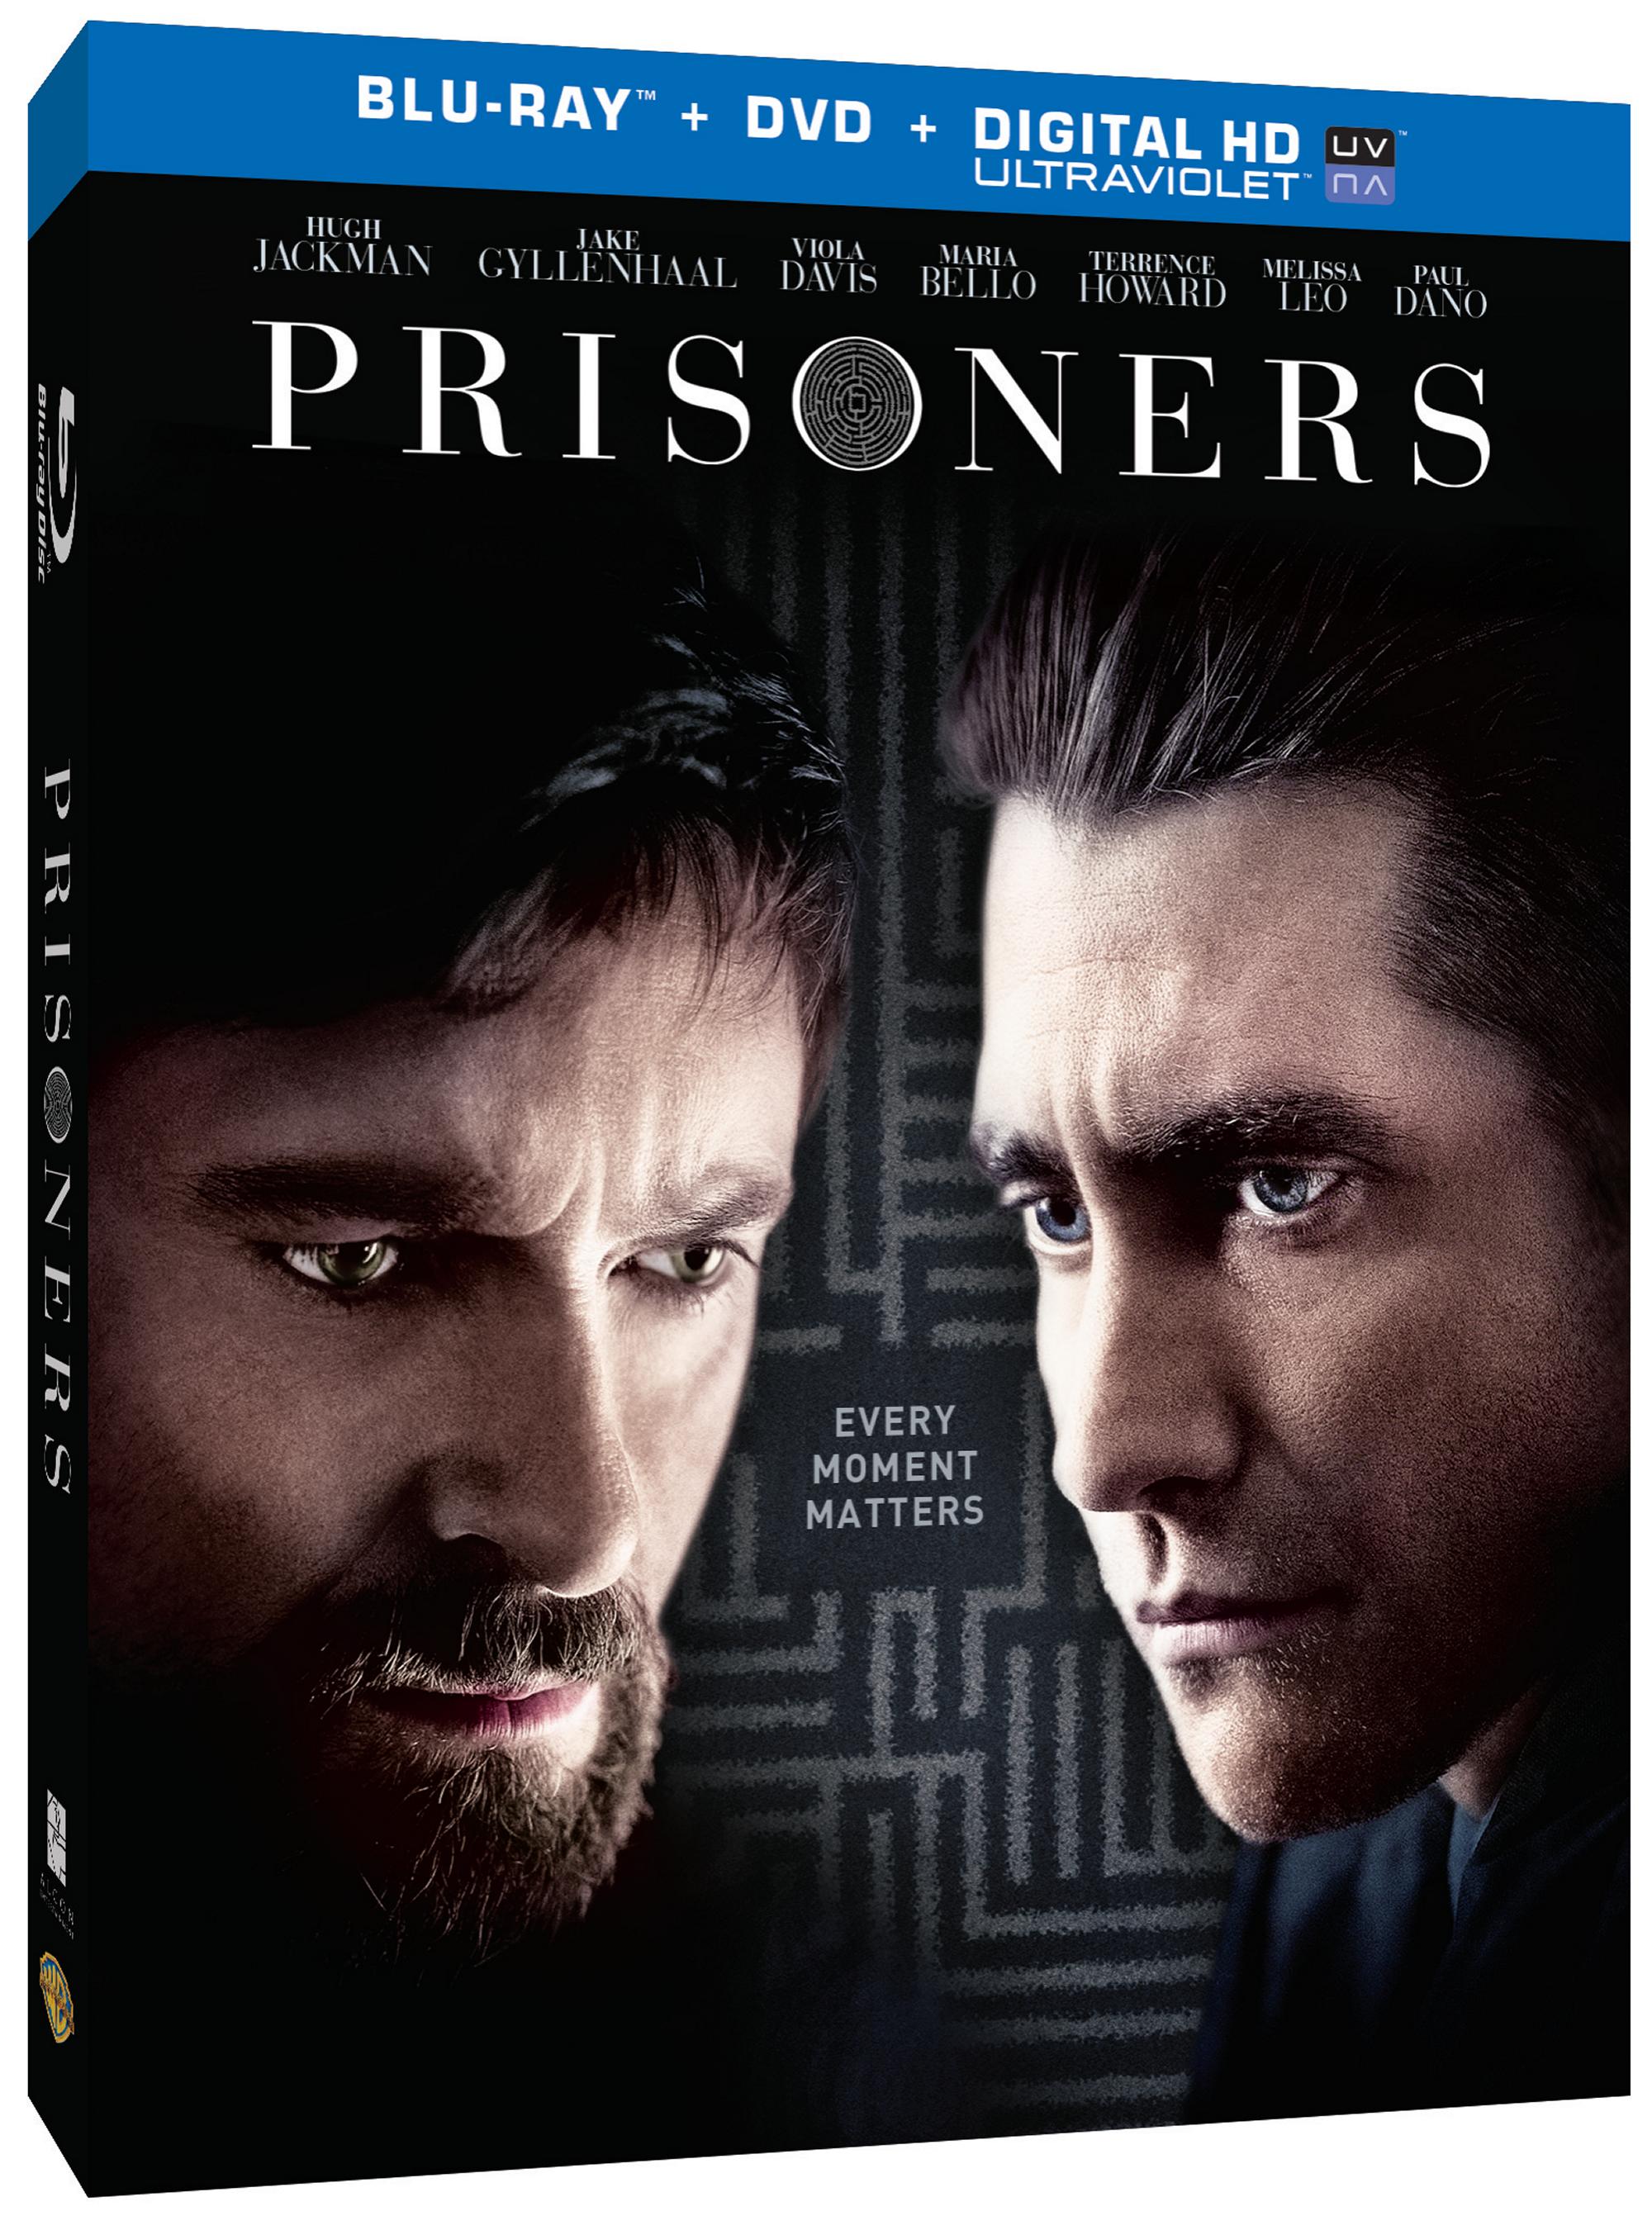 Prisoners Blu-ray Review